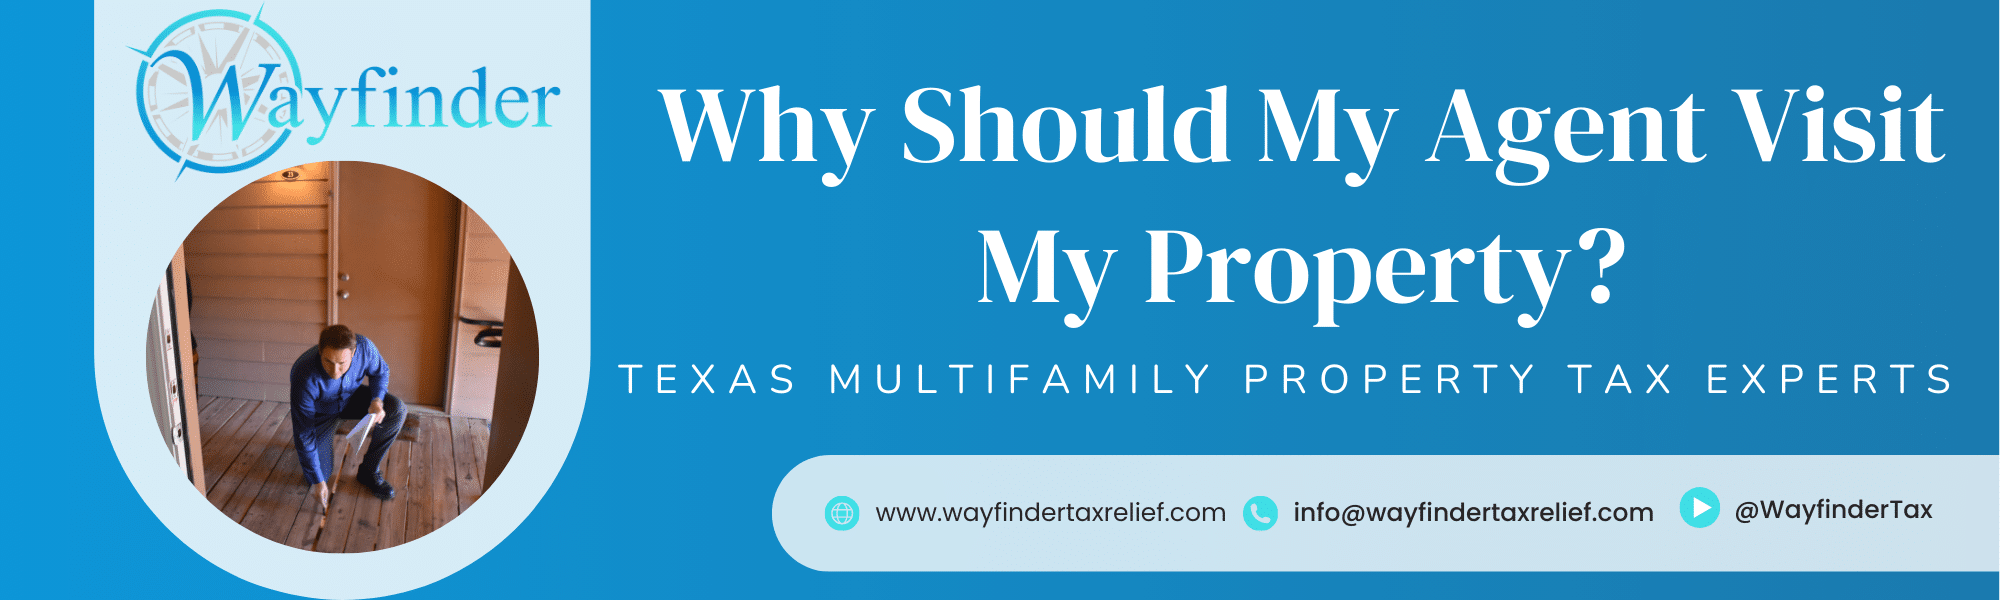 Why Should My Agent Visit My Multifamily Property?